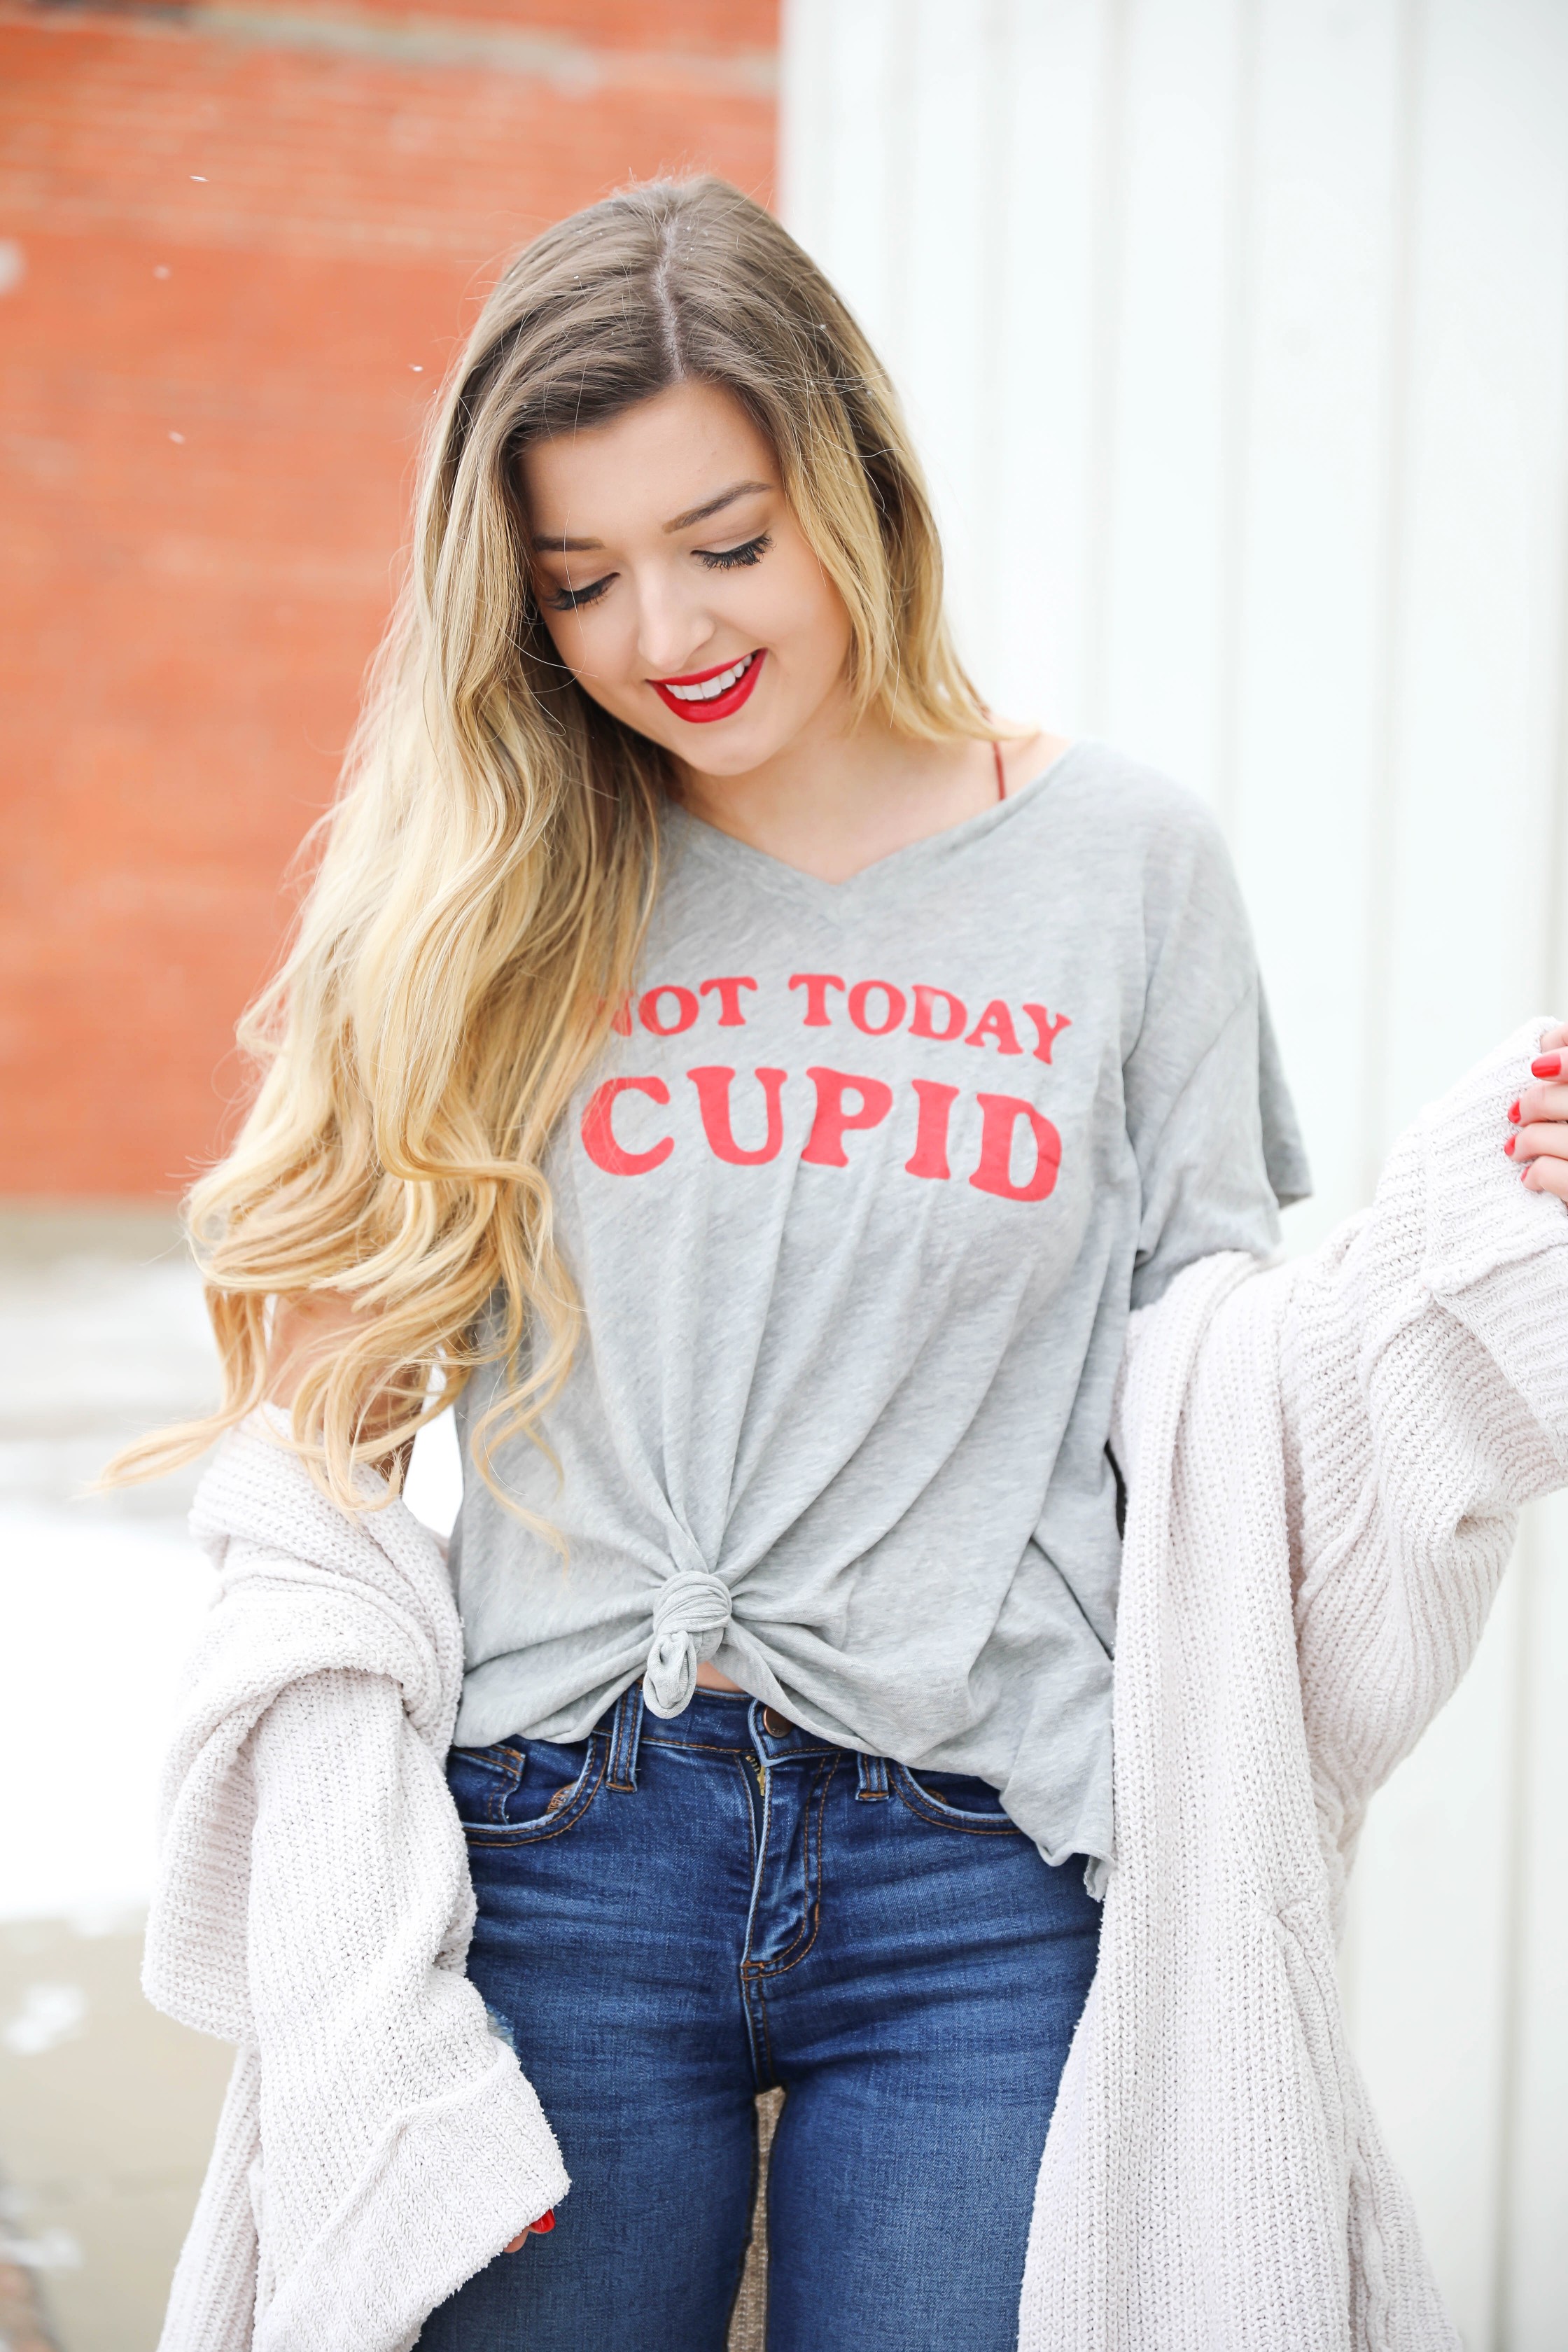 Not today cupid valentine's day tee! Single tee for Valentine's Day. I love this funny valentine's day shirt with free people low tide cardigan over it! I paired it with my red glossy hunter boots! Details on daily dose of charm by lauren lindmark